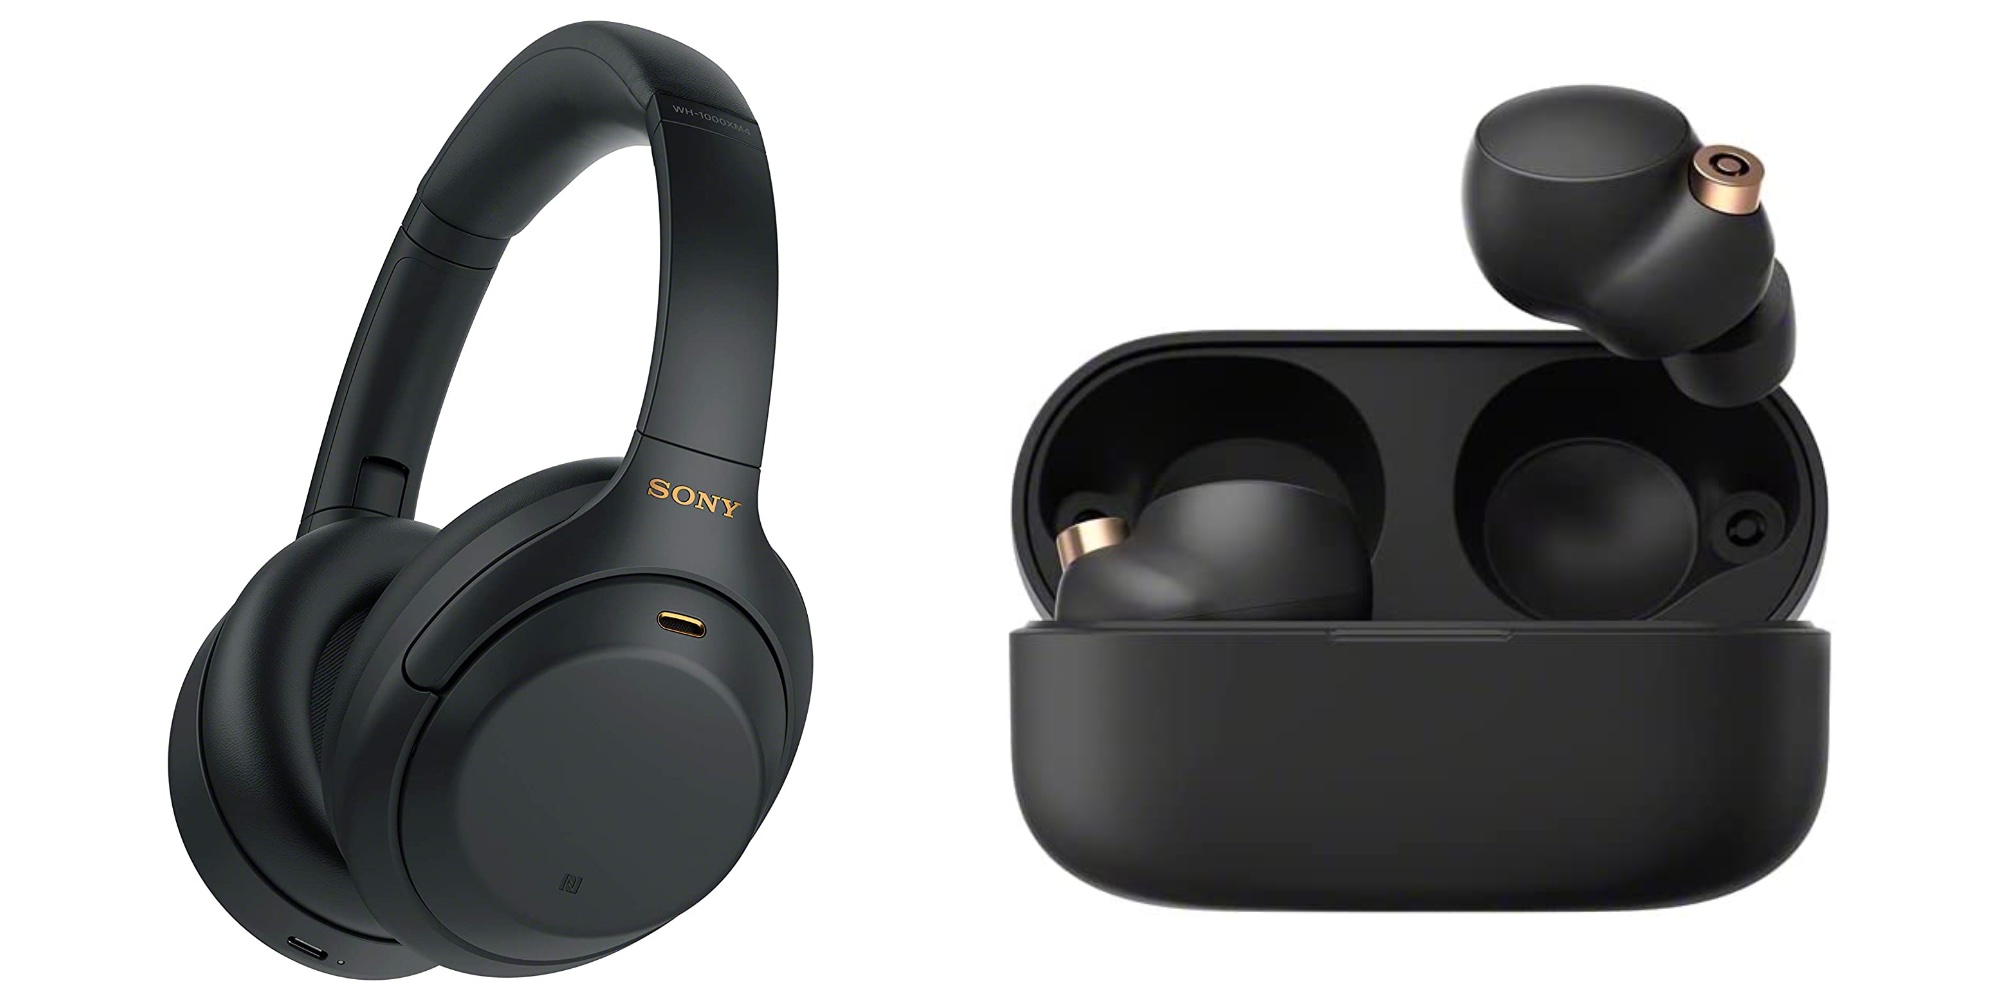 Sony XM4 ANC headphones and true wireless earbuds hit new lows